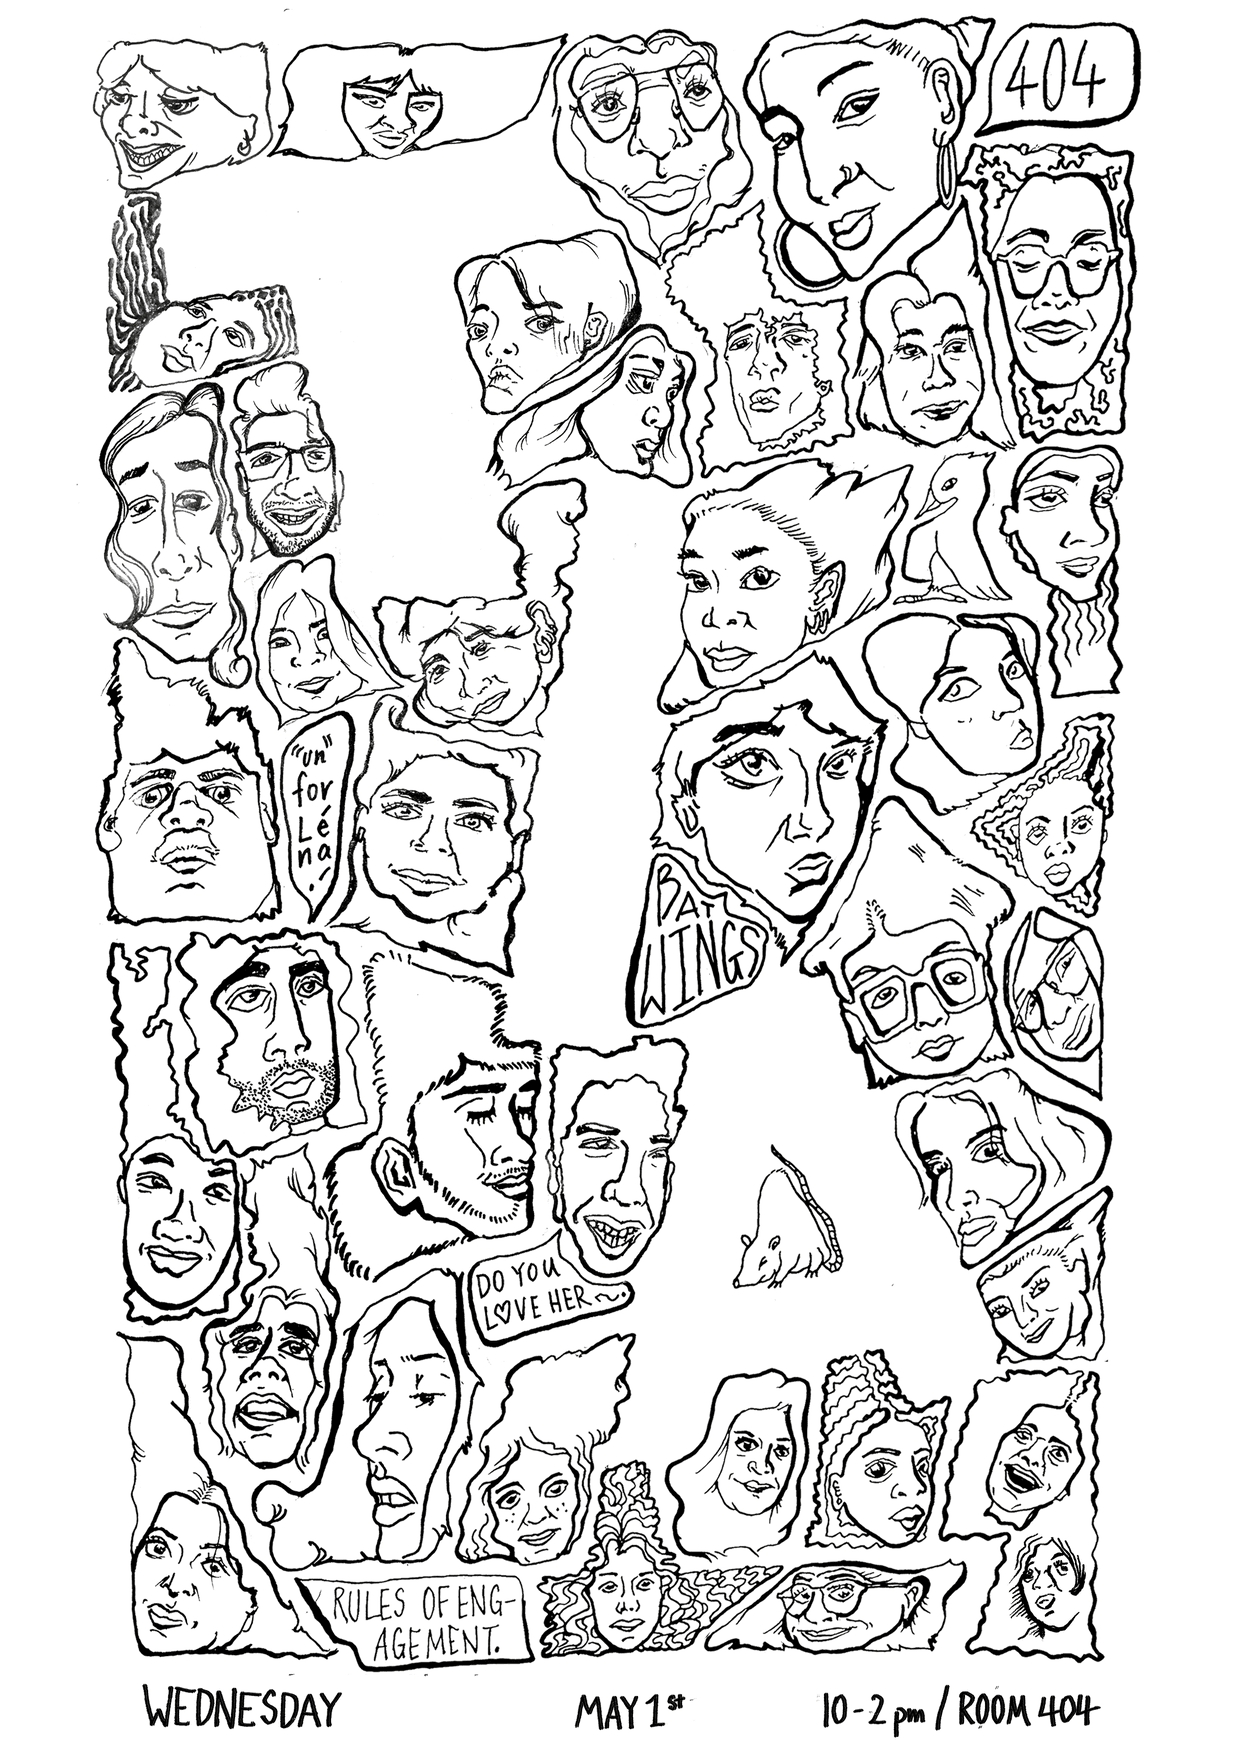 Line drawing of the faces of each student in the class, forming the letters TIA. Text bubbles say "rules of engagement," "un for Lena," "bat wings," and "do you love her?" All other text is in the article.